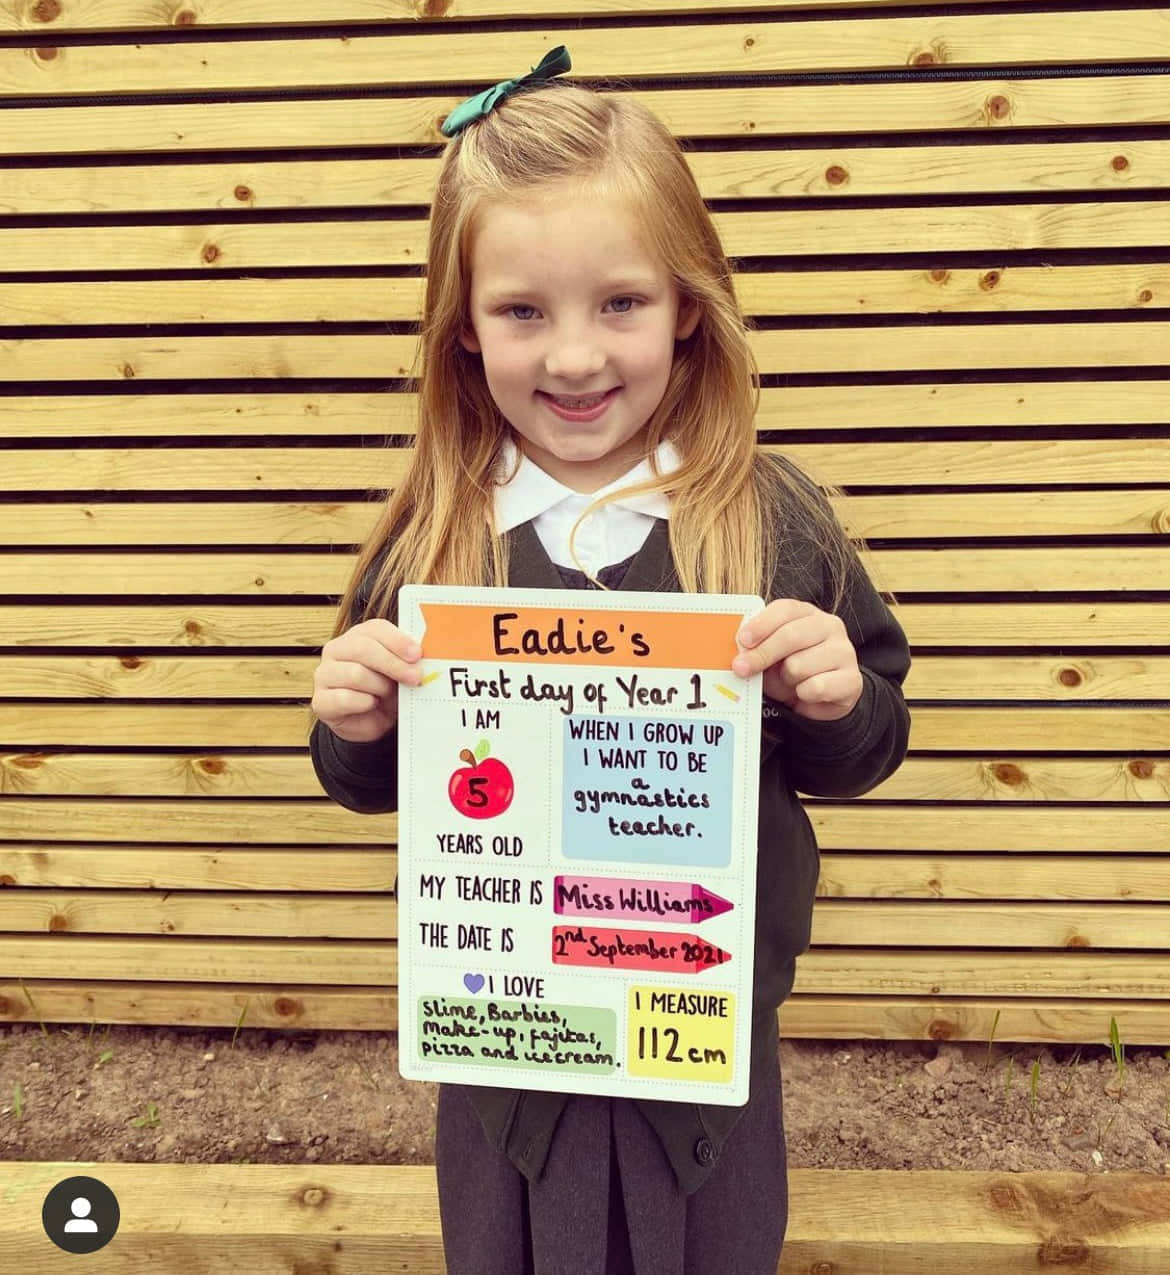 A Girl Holding Up A Sign That Says Edward's First Day Of School